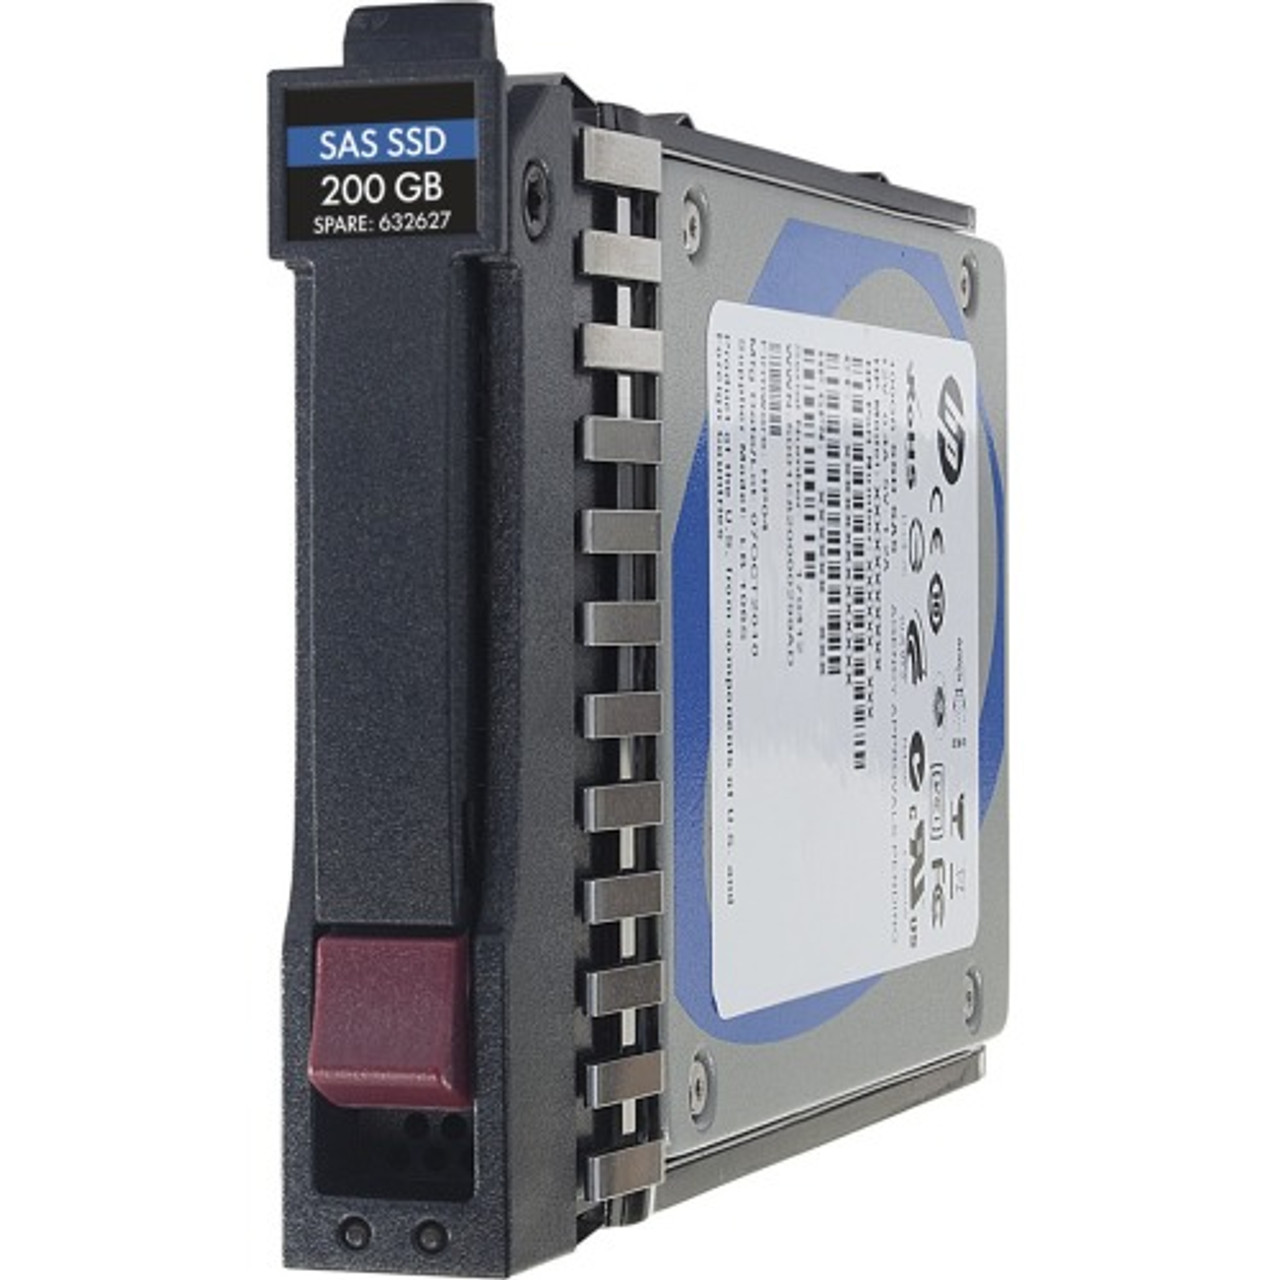 H6G45A HPE 1.8TB 10000RPM SAS 6Gbps Hot Swap 2.5-inch Internal Hard Drive for XP7 Storage Array System